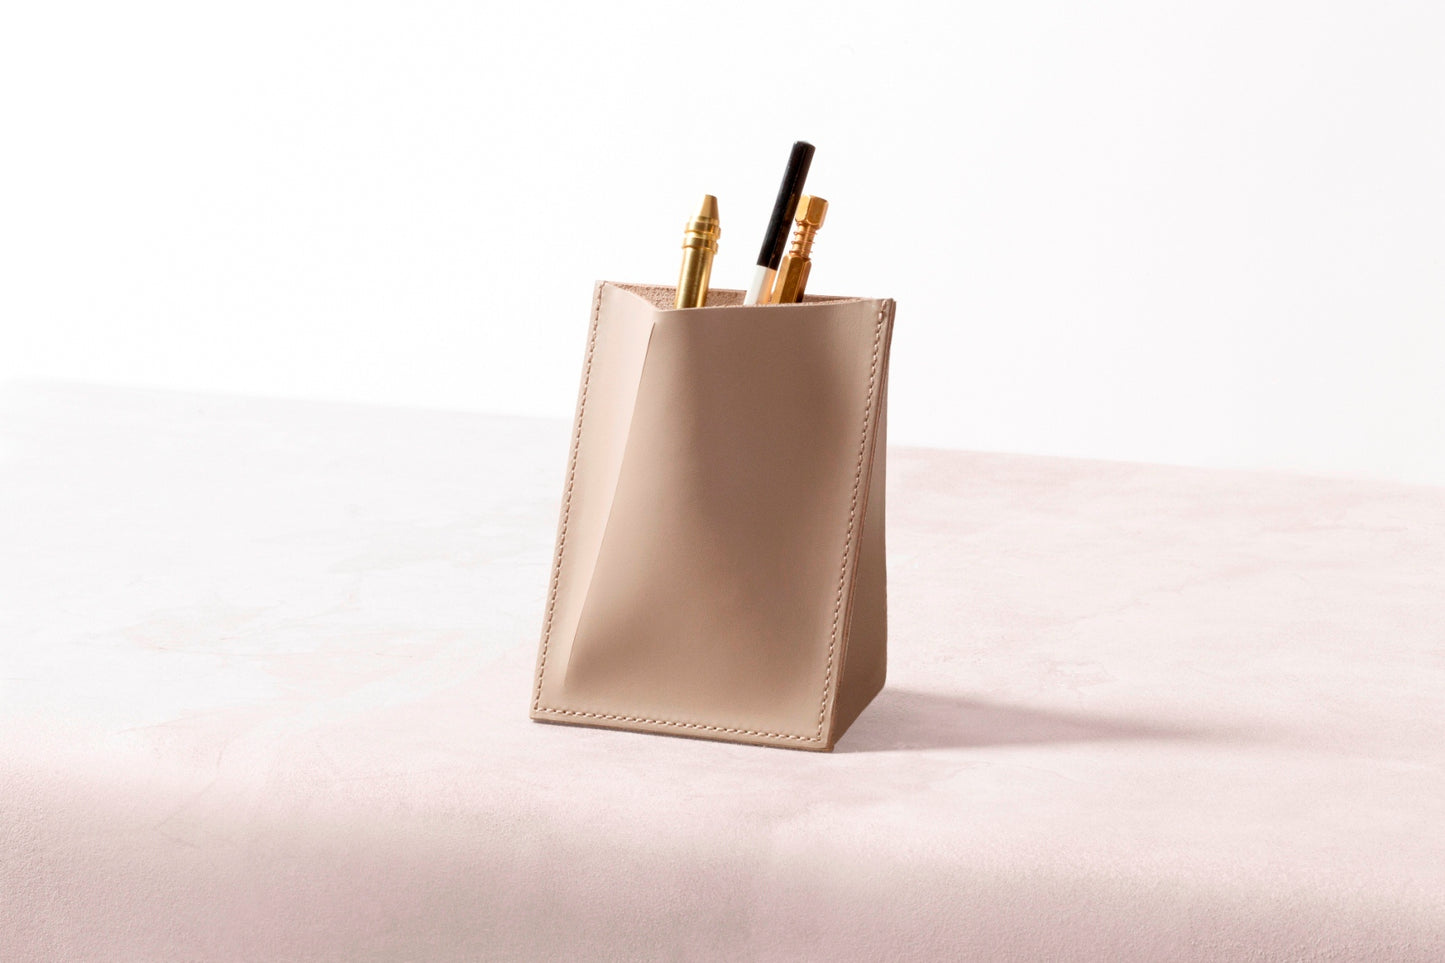 Rabitti 1969 Fold Saddle Leather Pen Holder | Elegant and Functional Pen Holder | Crafted with High-Quality Saddle Leather | Elevate Your Workspace with Luxury and Style | Explore a Range of Luxury Desk Accessories at 2Jour Concierge, #1 luxury high-end gift & lifestyle shop